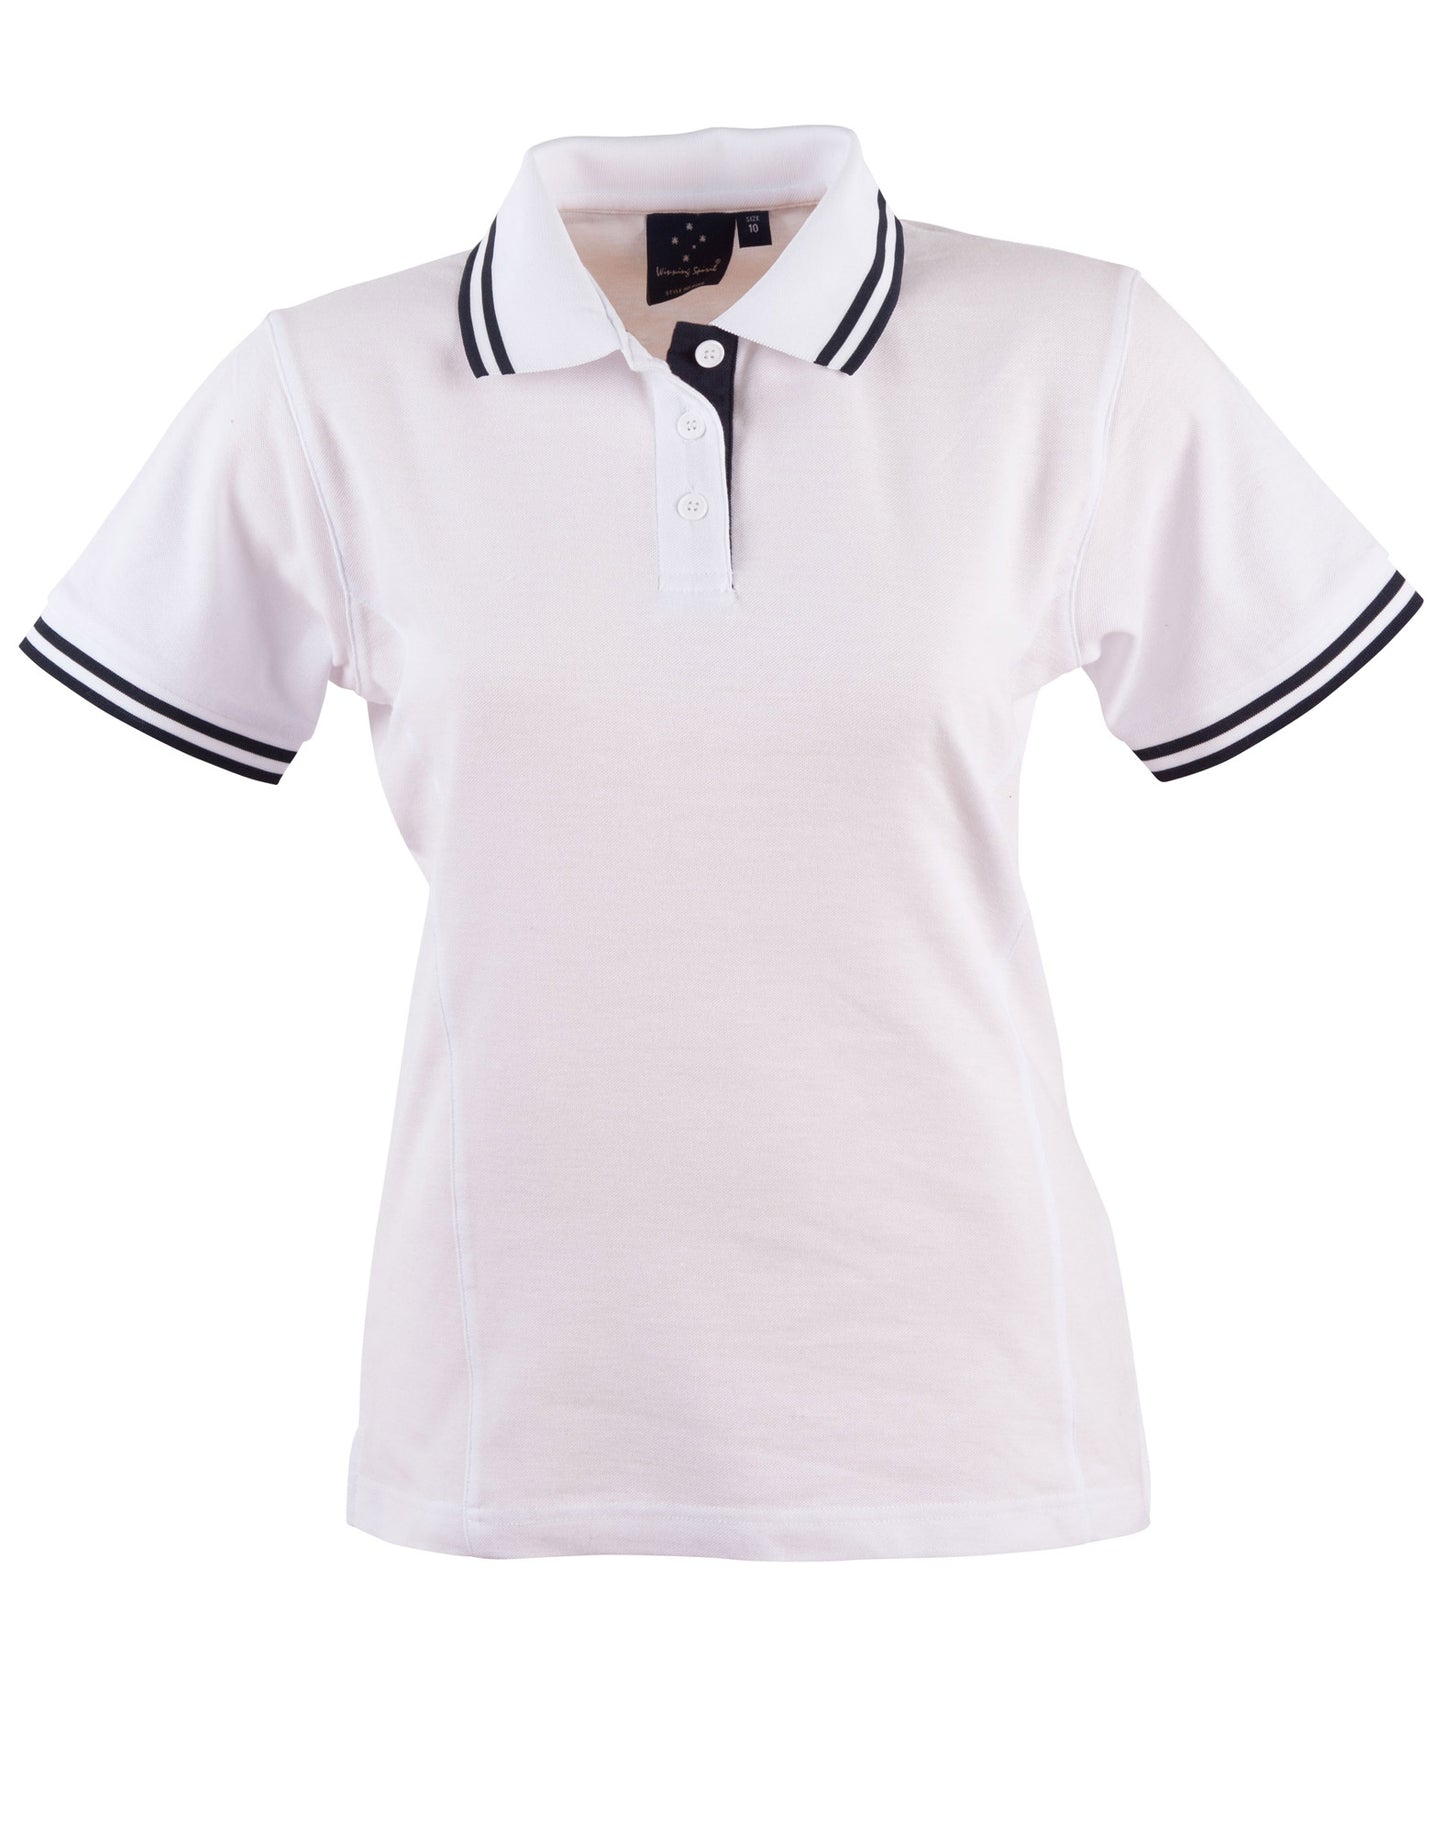 Contrast Ladies Short Sleeve Polo Shirt - made by AIW